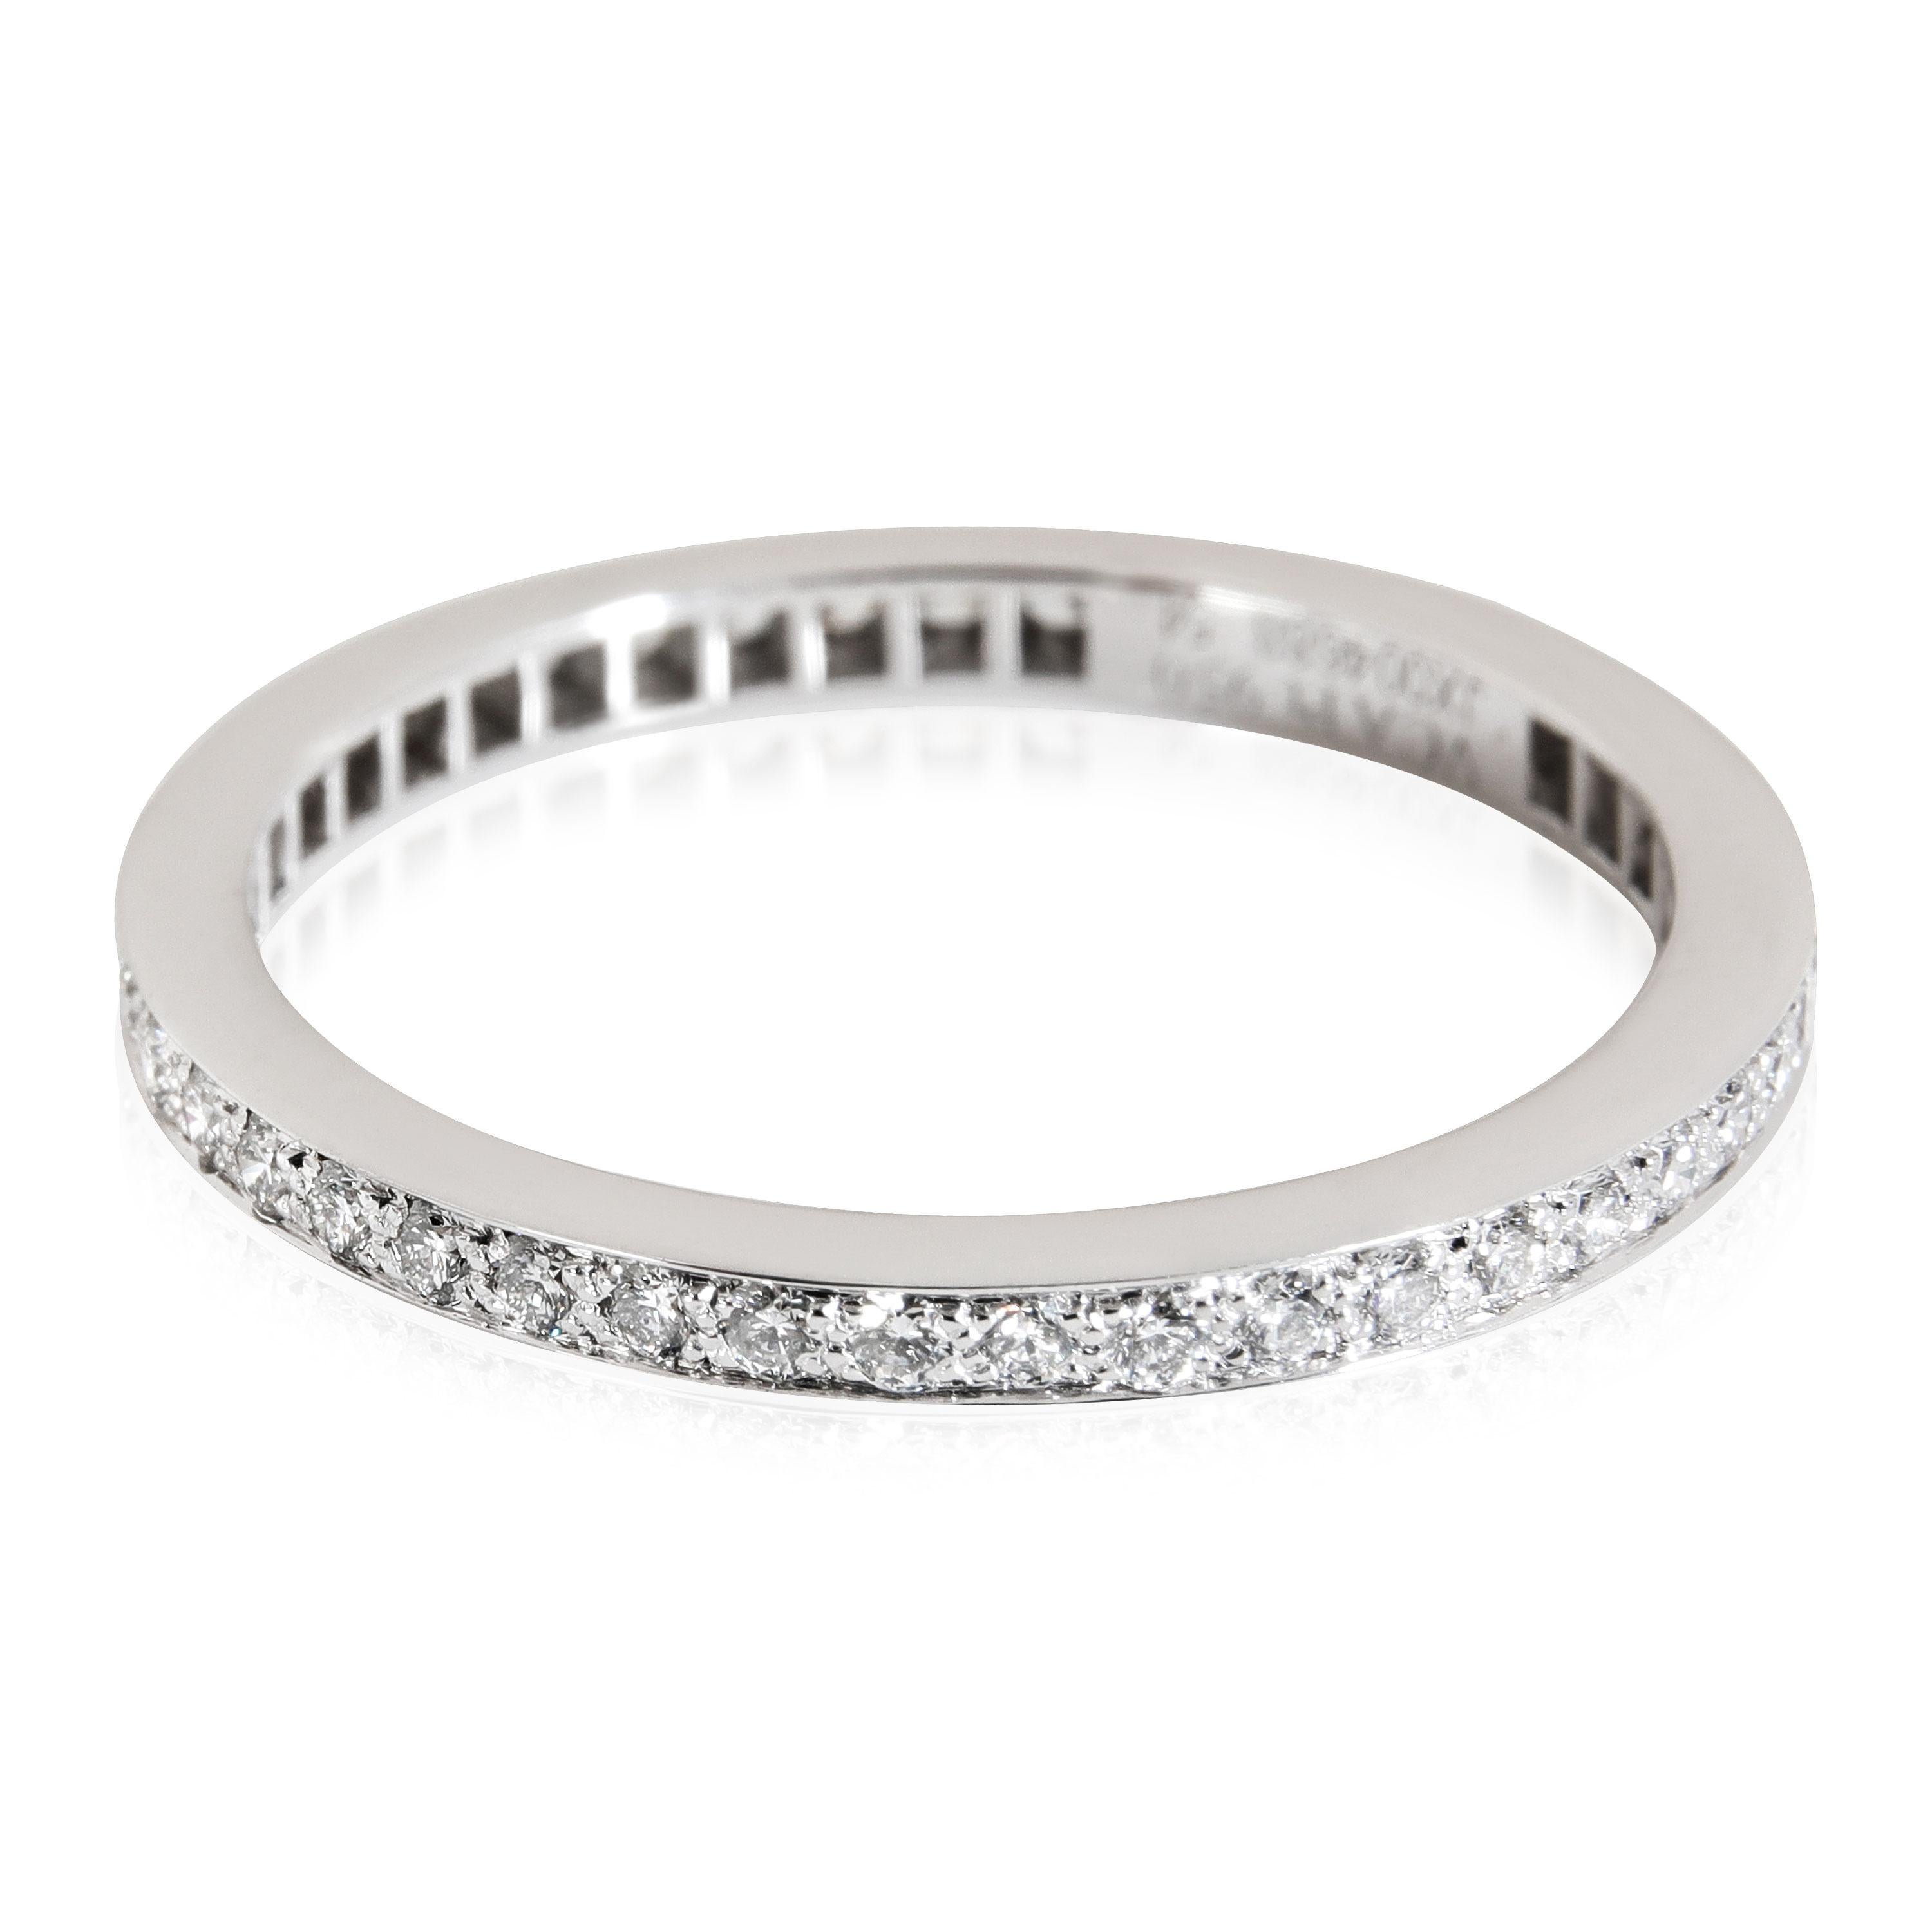 Van Cleef & Arpels Diamond Wedding Band in Platinum 0.39 CTW

PRIMARY DETAILS
SKU: 114664
Listing Title: Van Cleef & Arpels Diamond Wedding Band in Platinum 0.39 CTW
Condition Description: Retails for 4900 USD. In excellent condition and recently